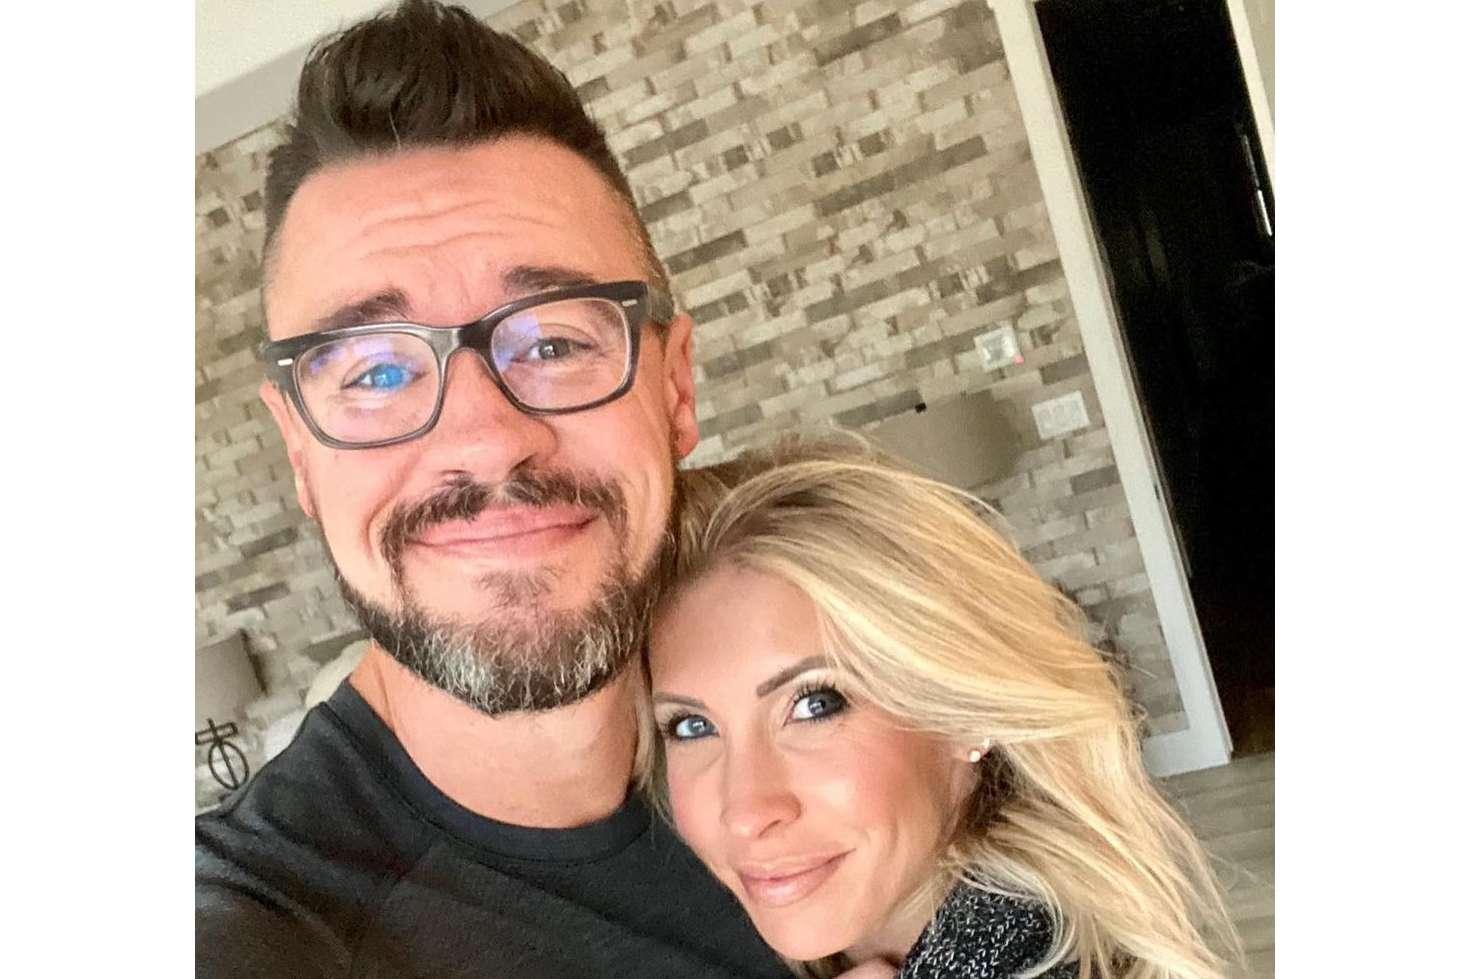 Heidi Powell Opens Up About Loving Dave Hollis in Birthday Post